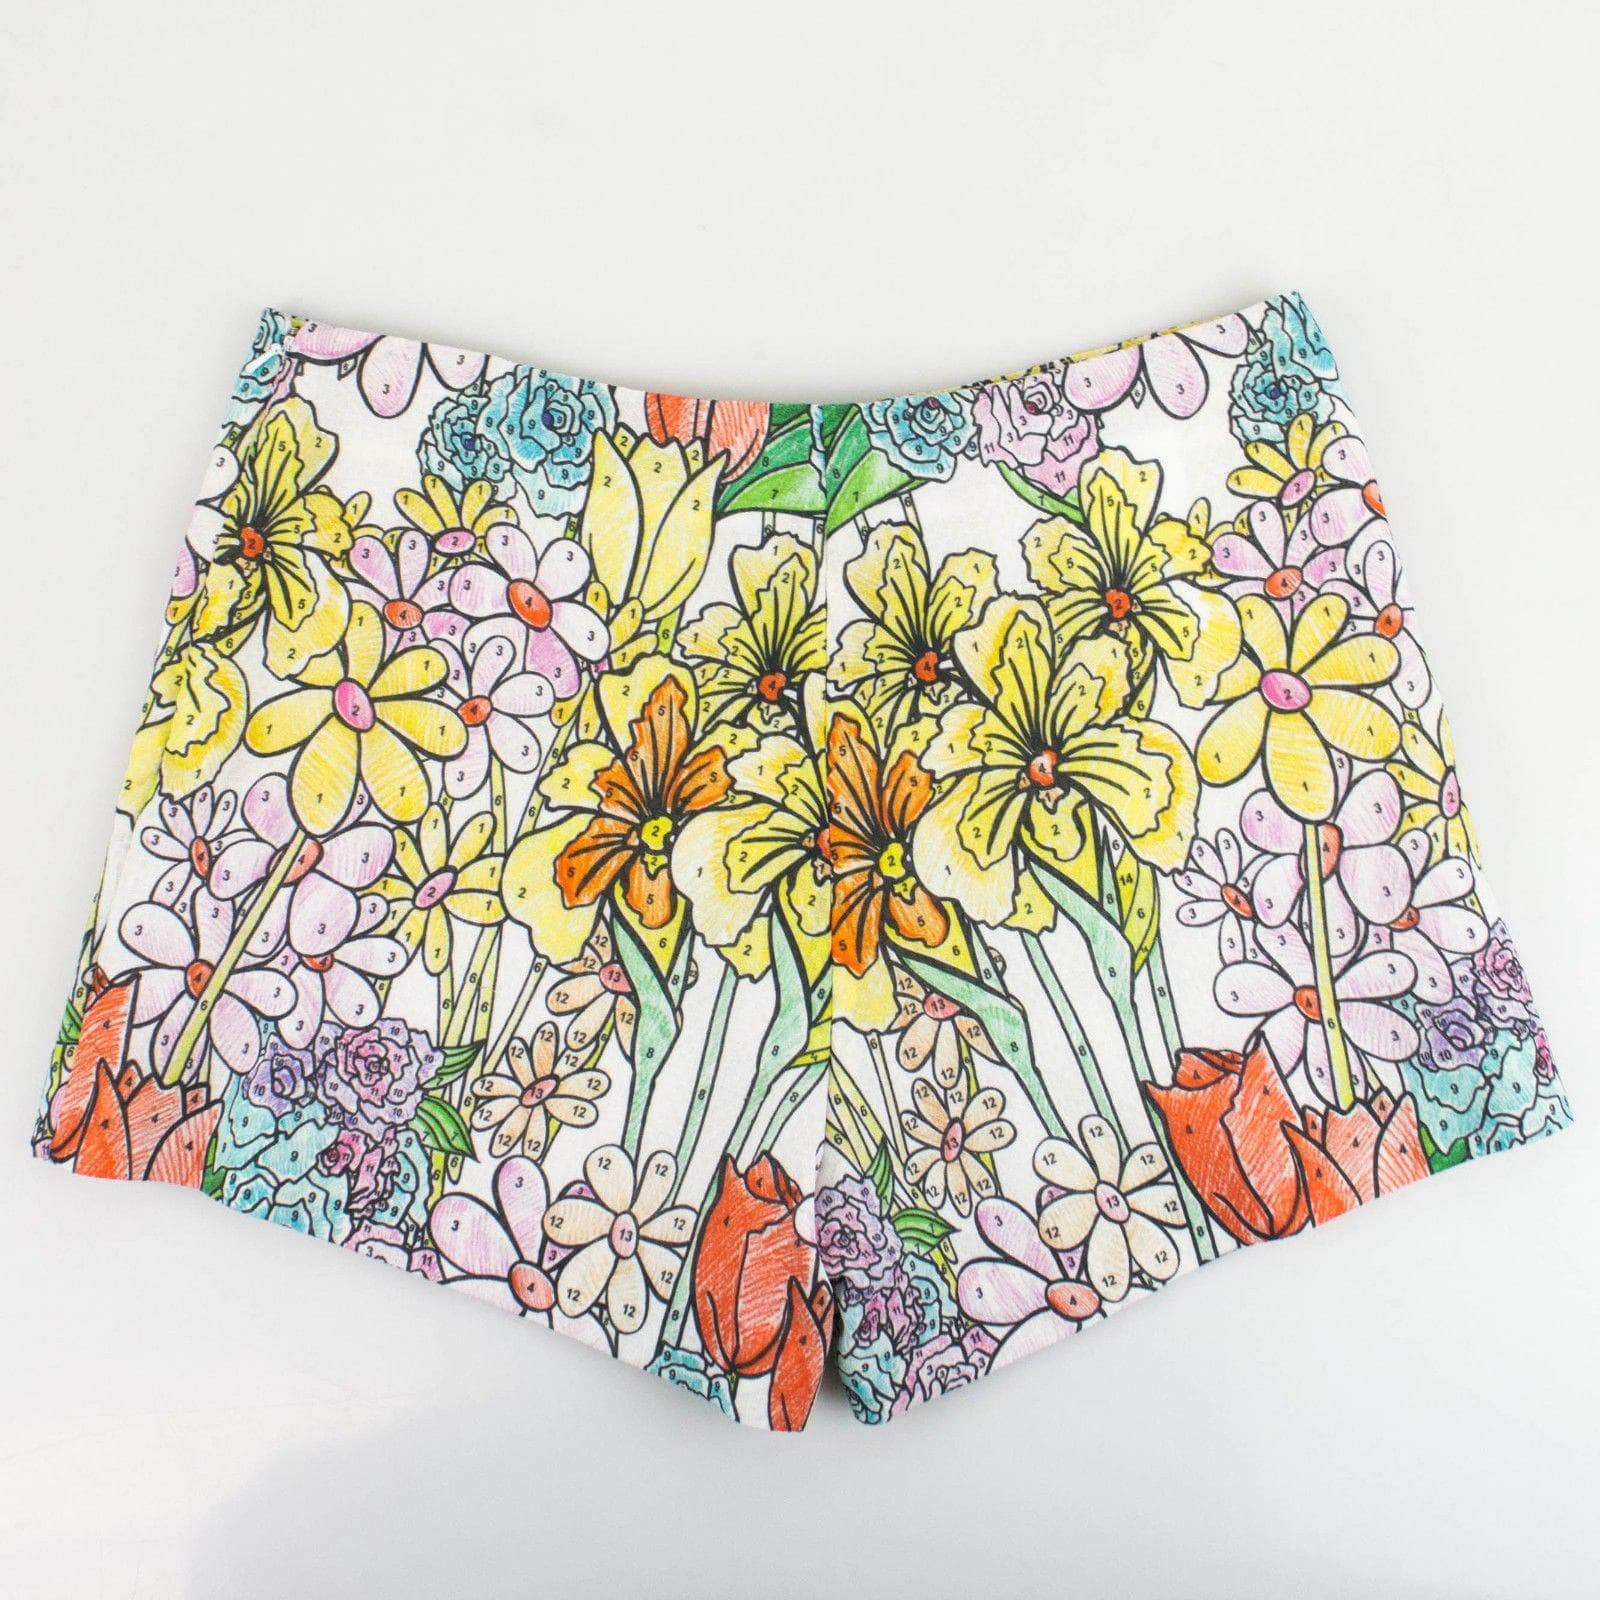 MOSCHINO COUTURE X JEREMY SCOTT 250-500, chicmi, couponcollection, gender-womens, main-clothing, moschino-couture-x-jeremy-scott, size-6-us-40-eu 6 US / 40 EU MOSCHINO COUTURE X JEREMY SCOTT Women's White Cotton Floral Casual Shorts 54LE-1200/6 54LE-1200/6